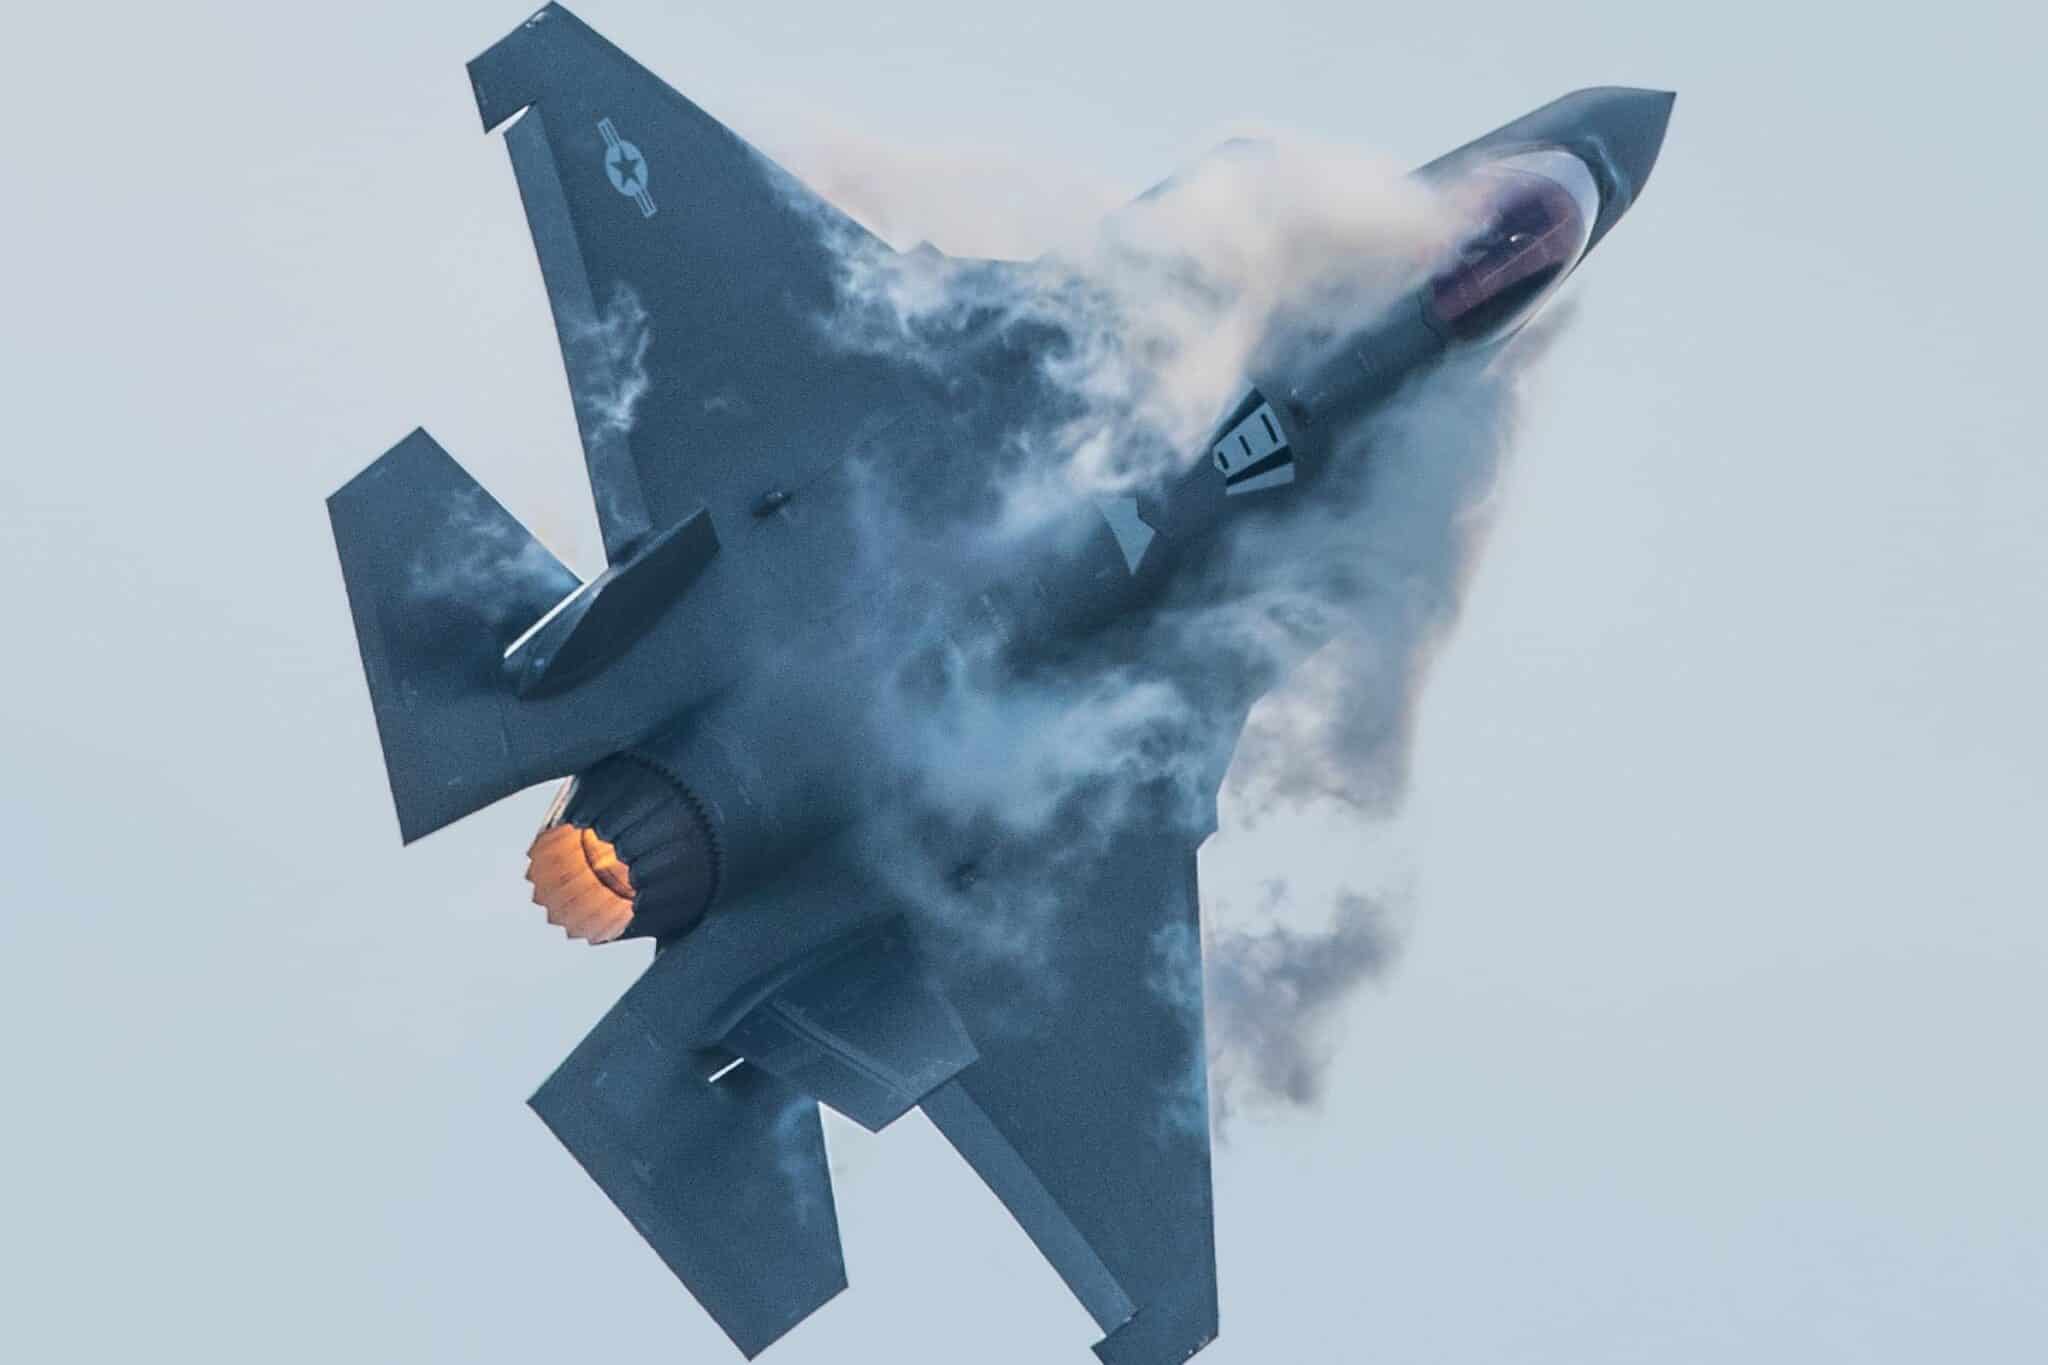 A cloud of smoke seemingly emerges from F-35 aircraft mid air as it executes a tight turn.